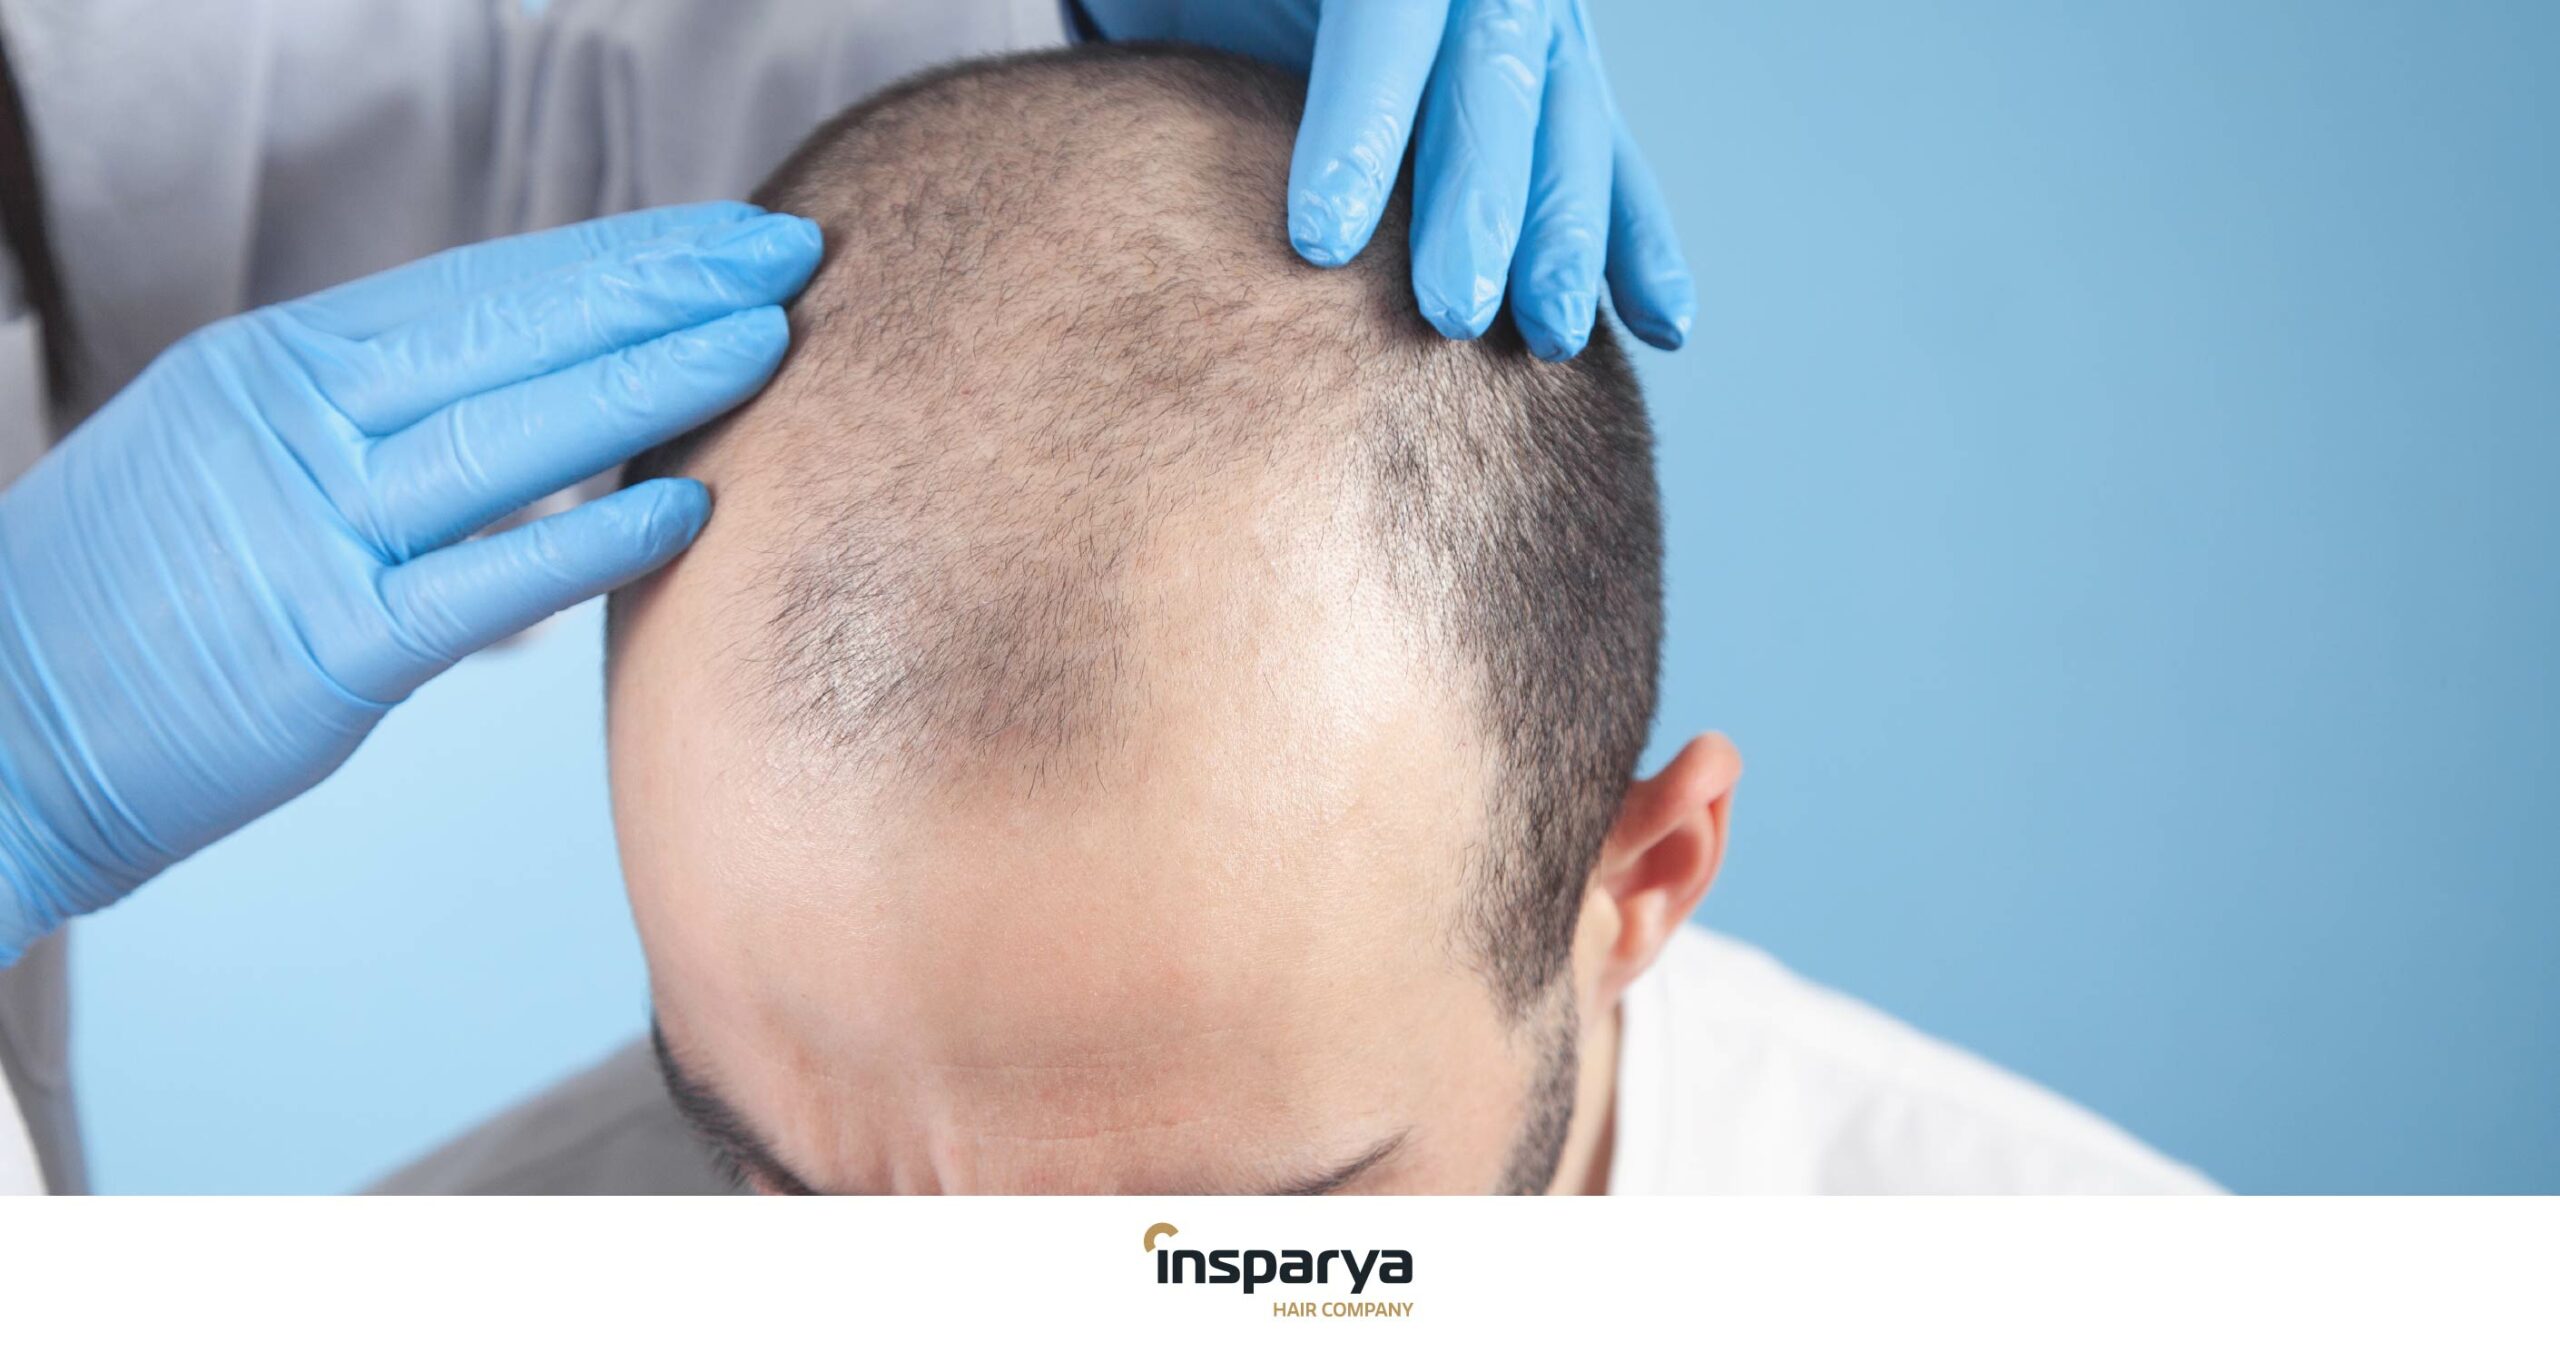 What expectations can we have with a hair transplant?